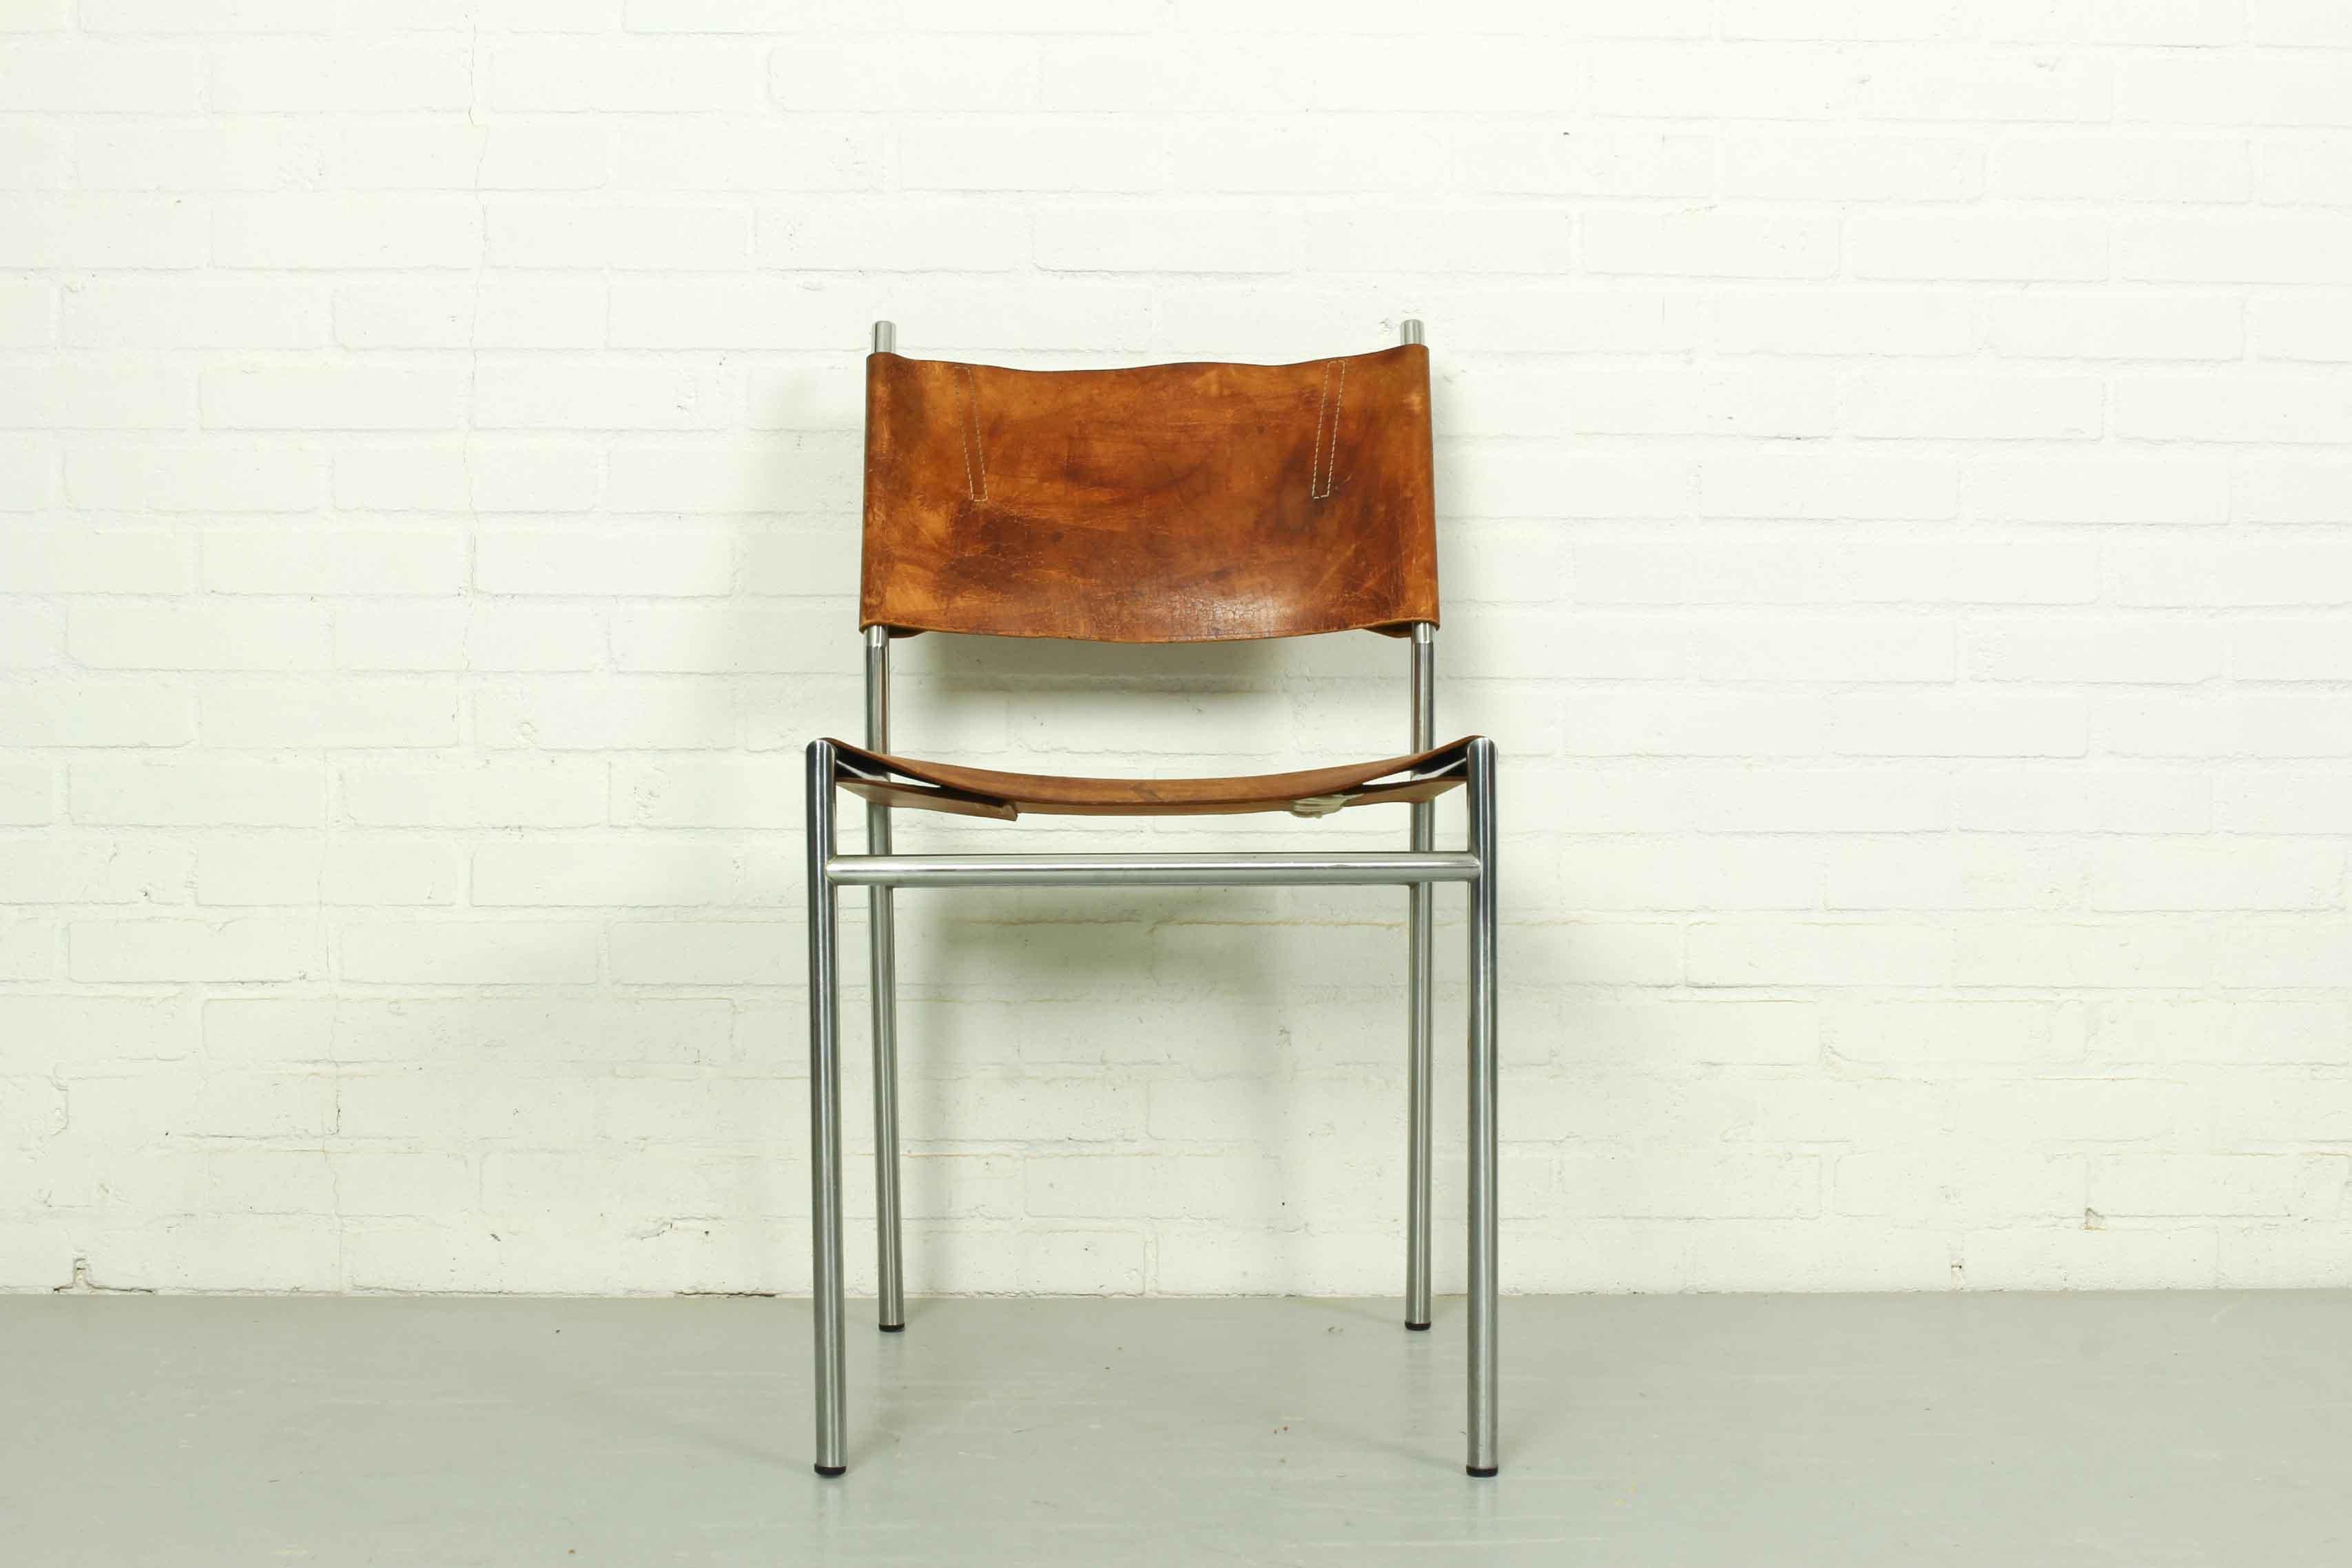 Minimalist Mid-Century Modern SE06 dining chair designed by Martin Visser and manufactured by ‘t Spectrum, Netherlands 1967. This early versions of the SE06 chair has a stainless steel tubular metal frame and very nice thick saddle leather seat and